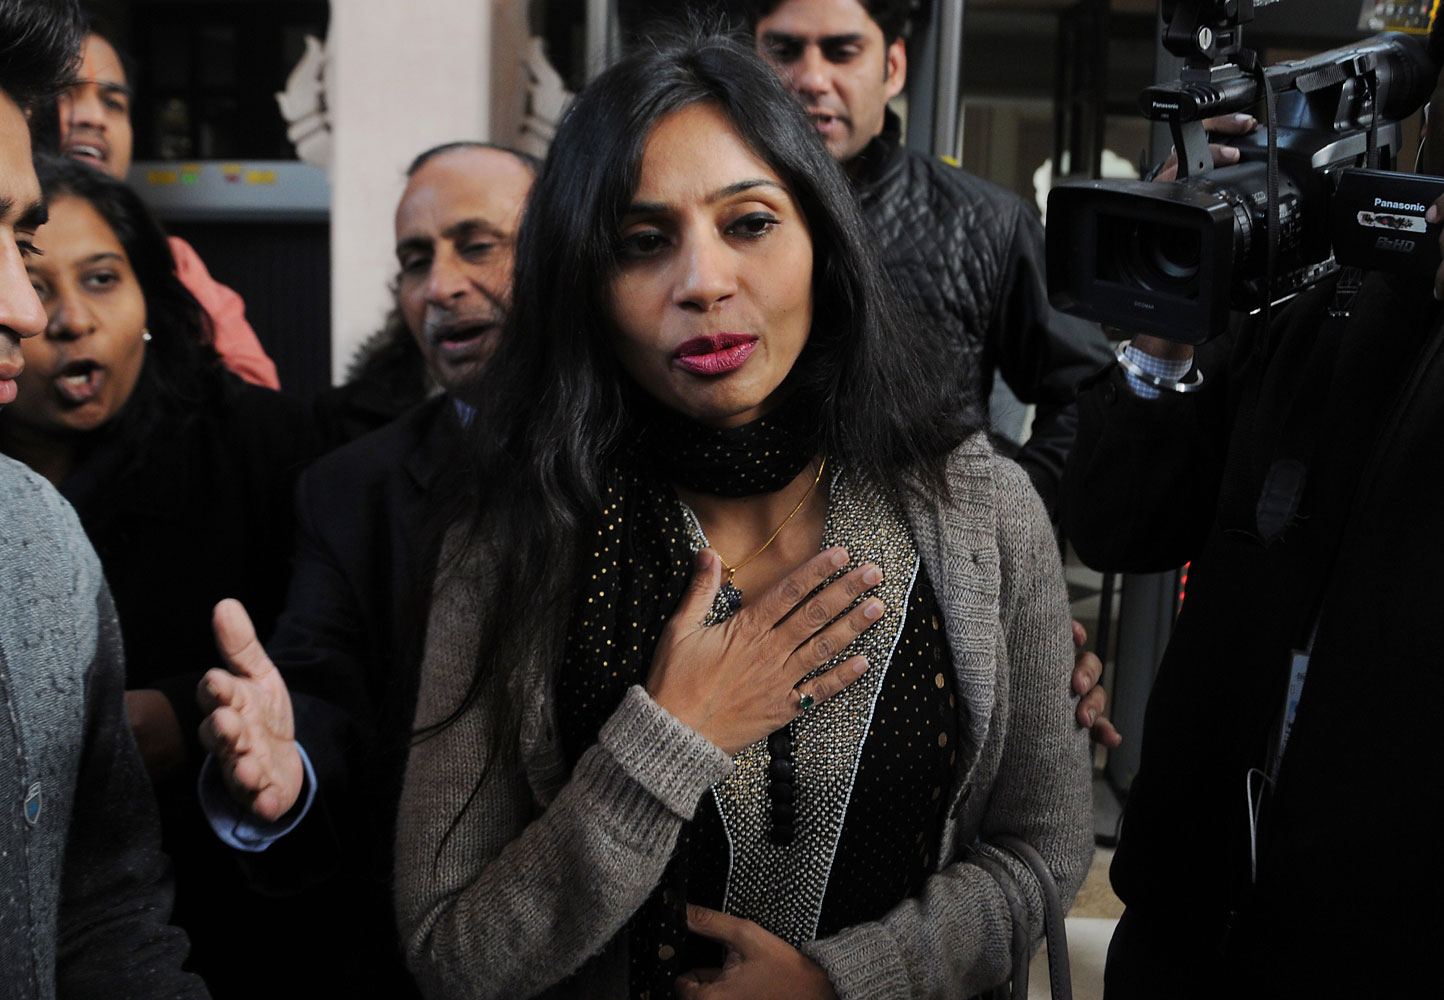 Indian diplomat Devyani Khobragade (C) leaves her guest house to meet with Indian Minister for External Affairs, Salman Khurshid in New Delhi on January 11, 2014. (AFP/Getty Images)